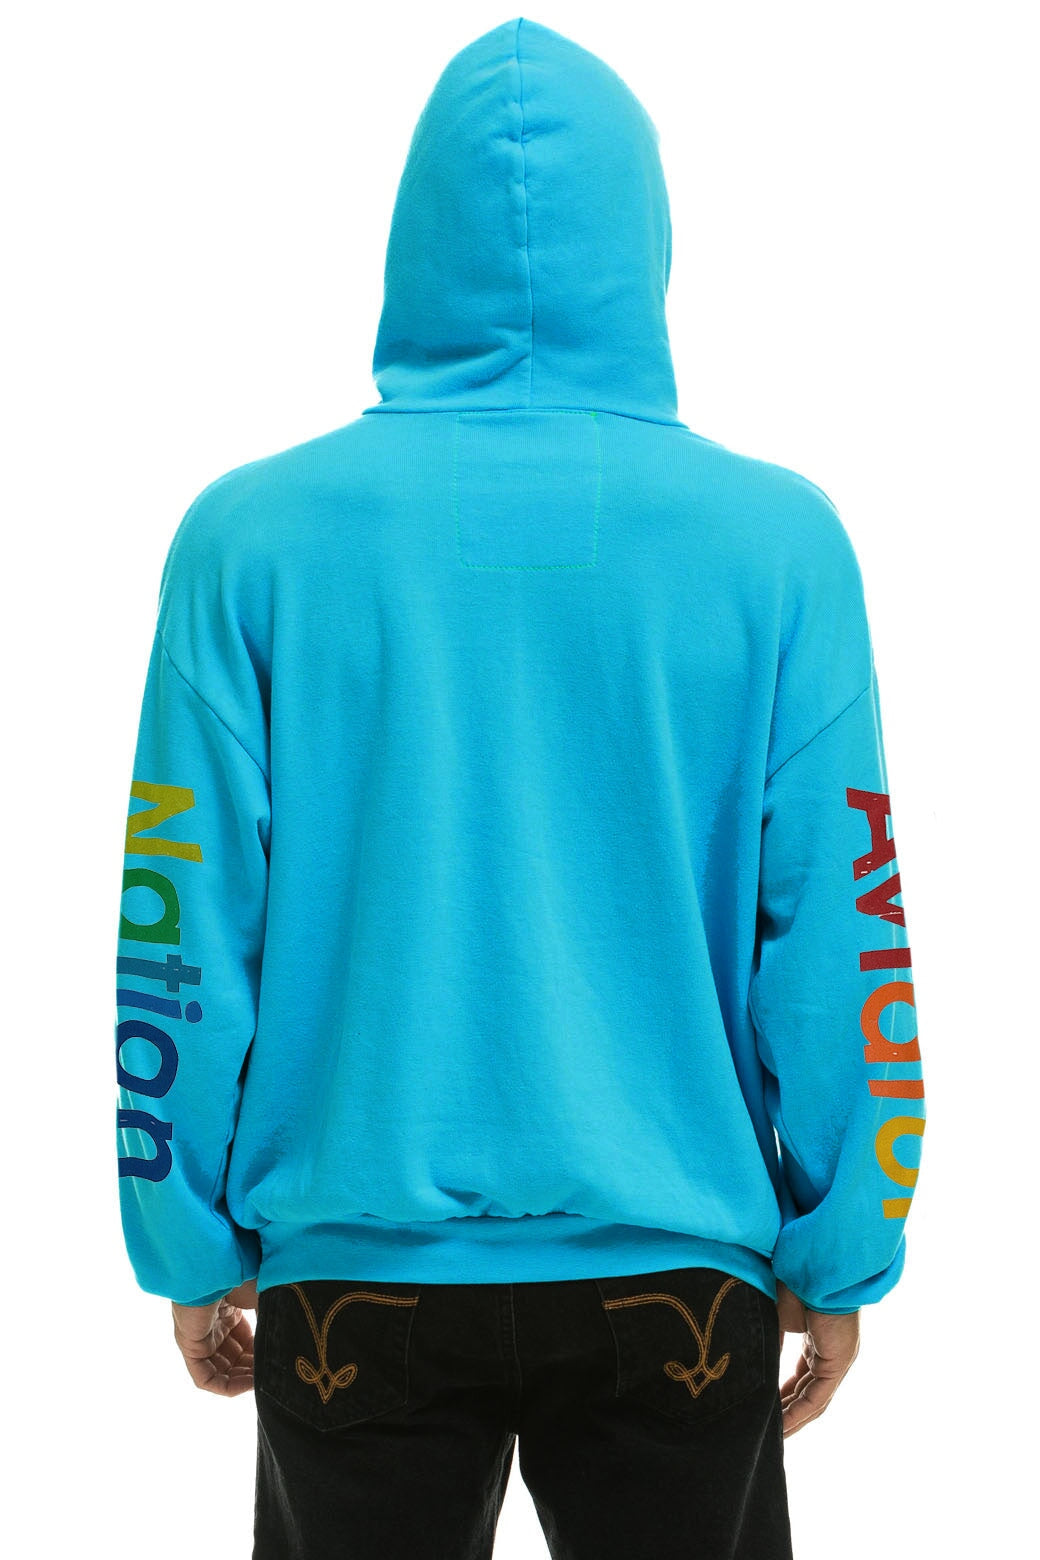 AVIATOR NATION NEW YORK CITY RELAXED PULLOVER HOODIE - NEON BLUE Hoodie Aviator Nation 